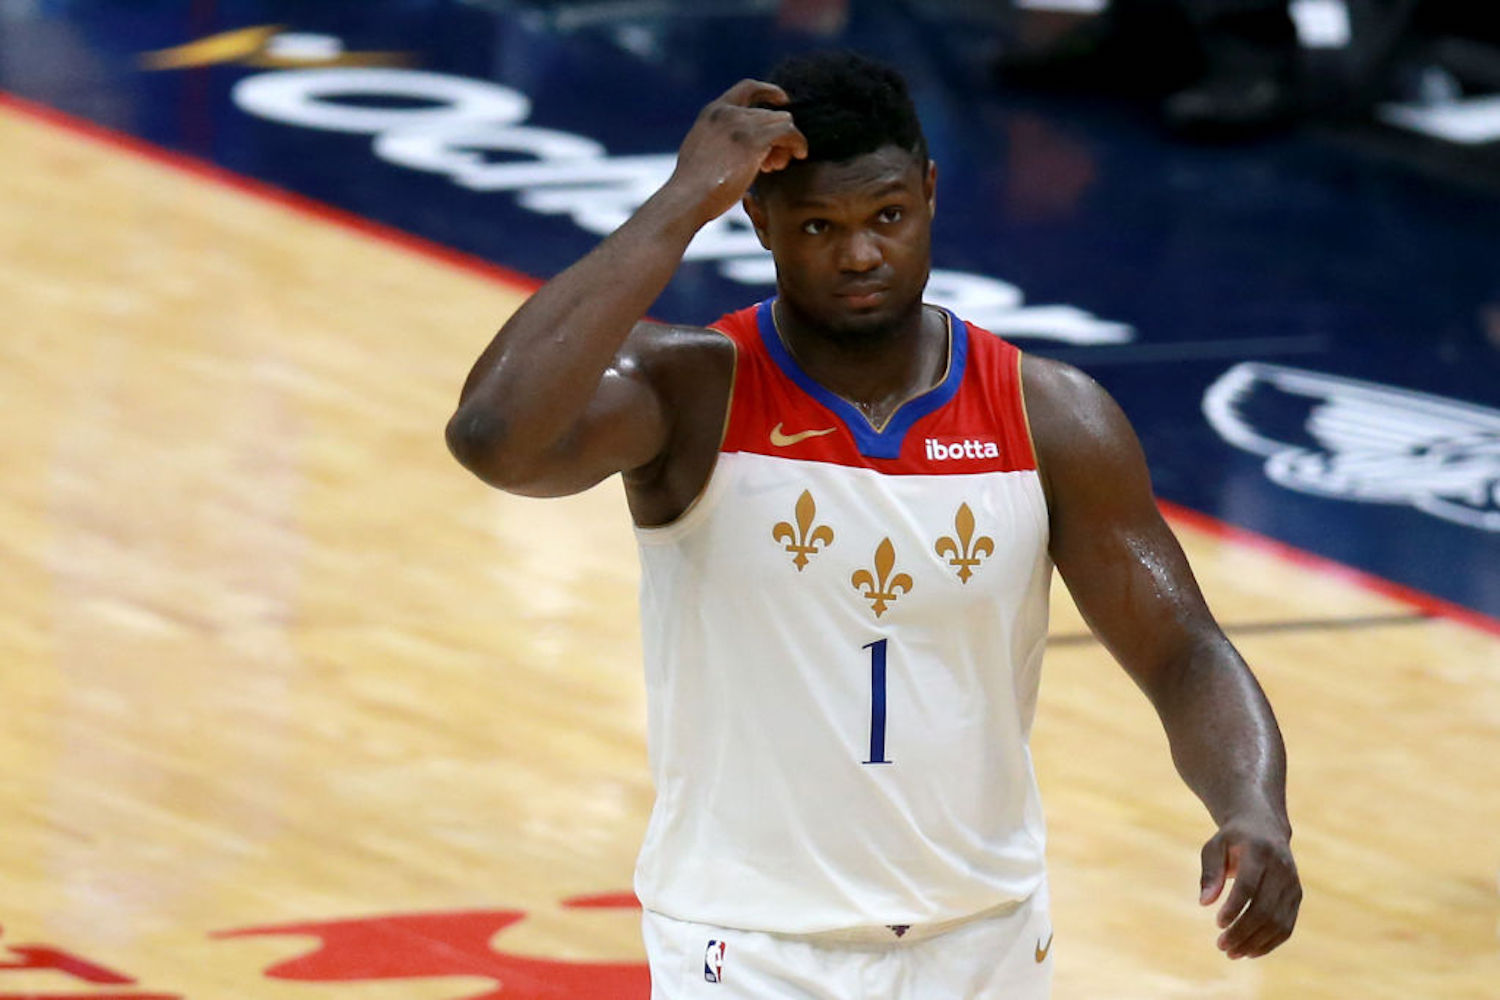 Zion Williamson isn't hurt, but he won't be suiting up for the Pelicans on Wednesday night. Why is he out and is it related to COVID-19?